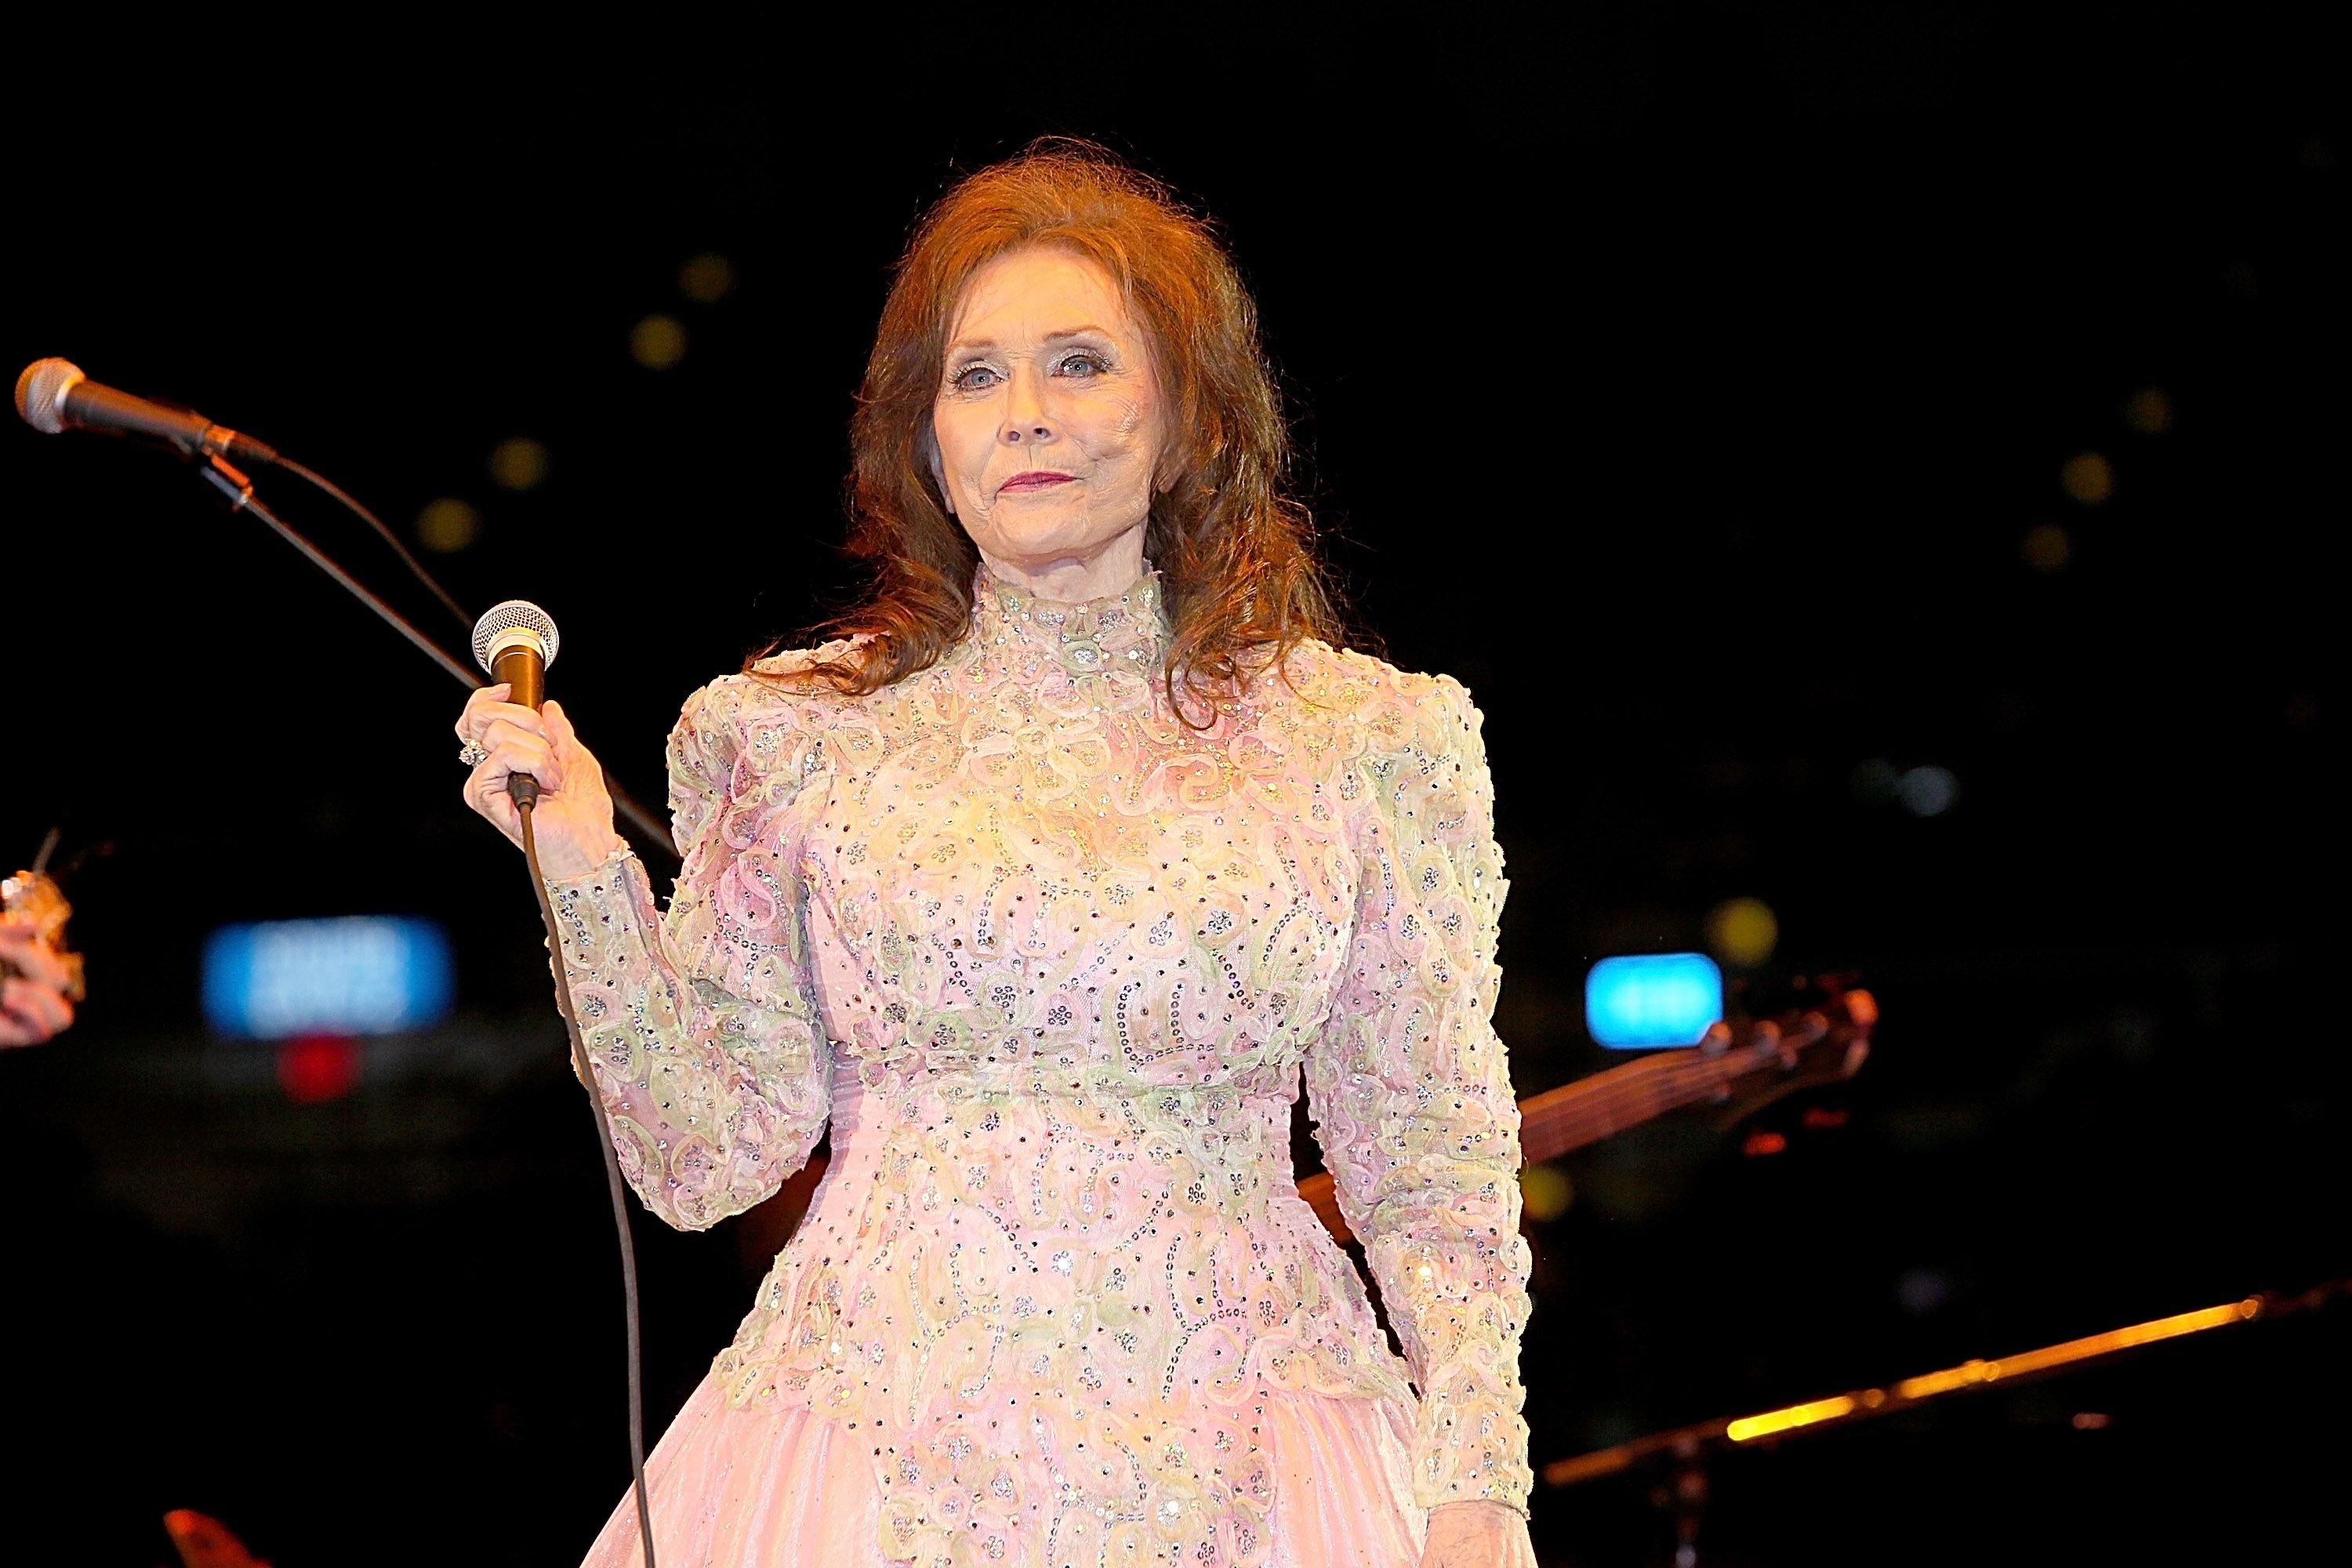 Loretta Lynn performs in concert during Rodeo Austin at the Travis County Expo Center on March 2, 2014 in Austin, Texas. | Source: Getty Images